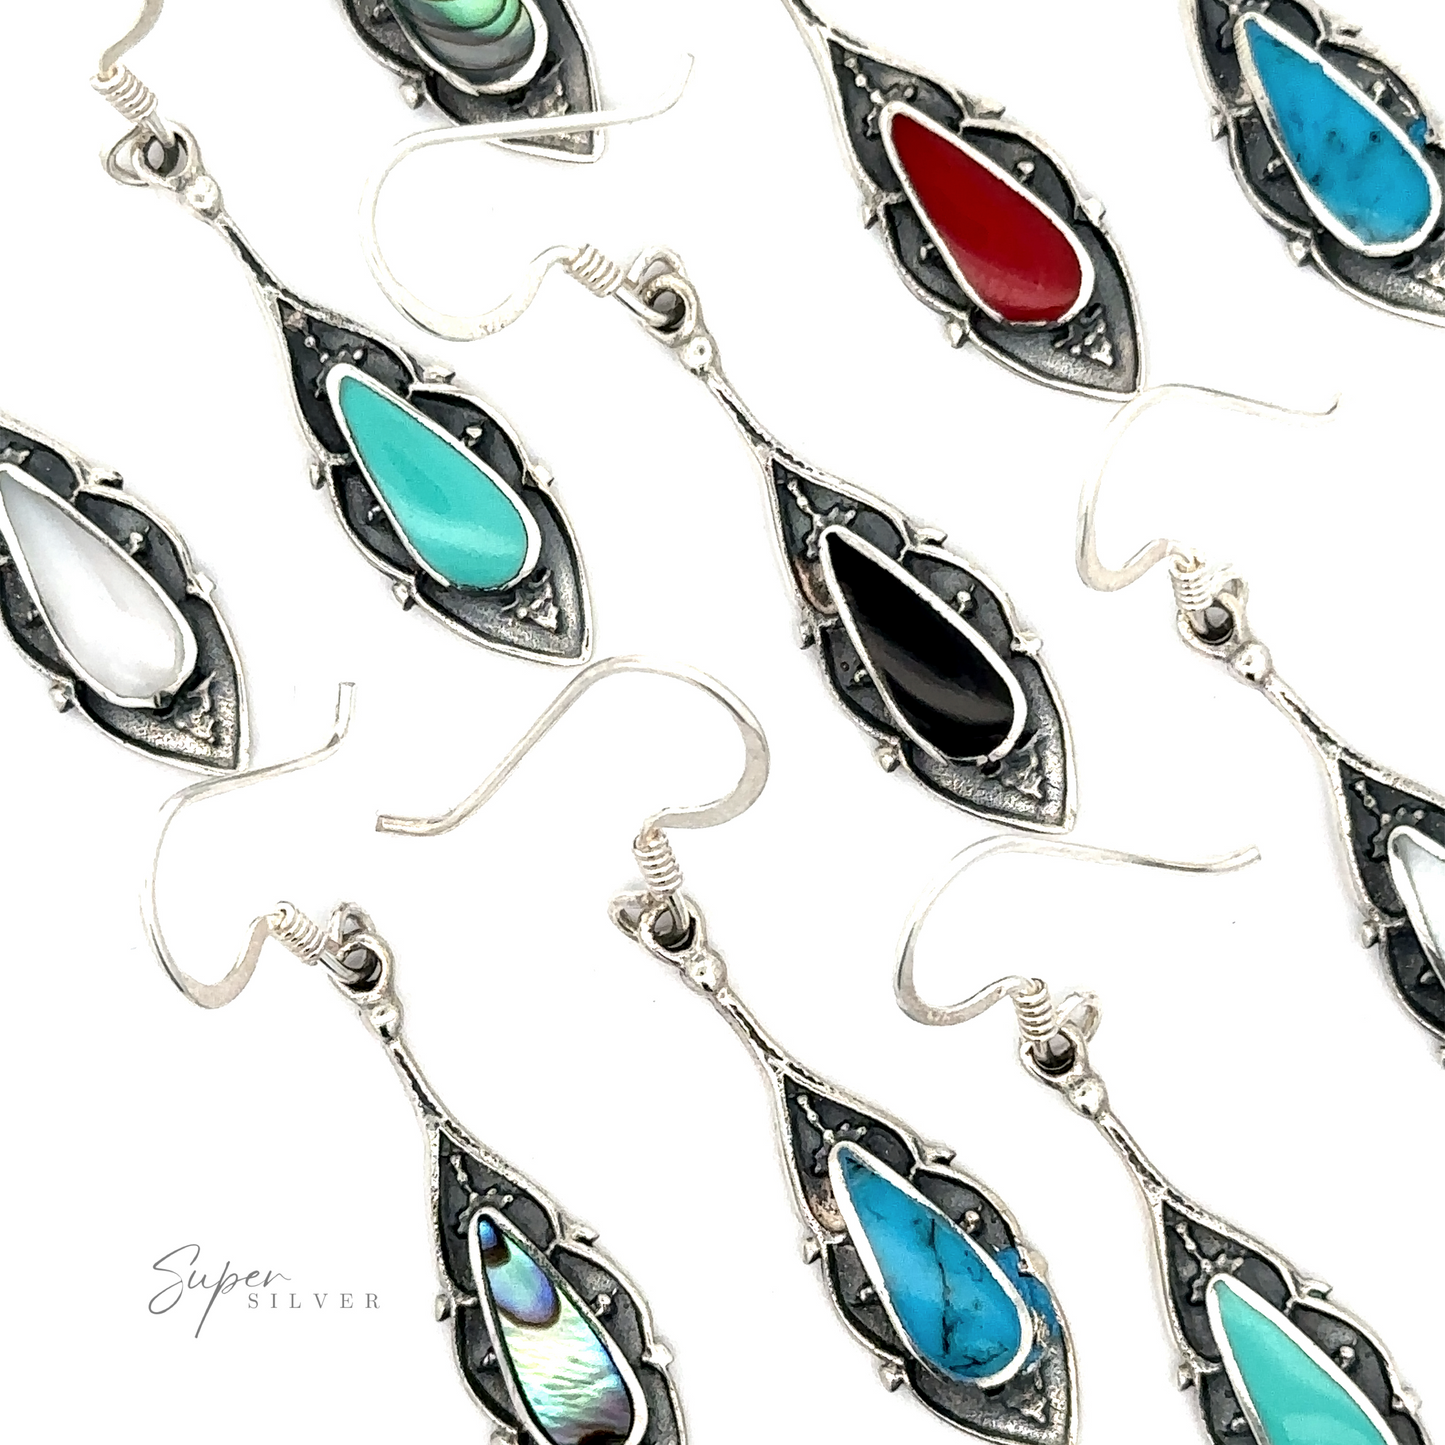 A collection of Teardrop Shape Inlaid Earrings featuring stones in various colors, including red, blue, turquoise, black, white, and abalone. The earrings are displayed in an organized manner.